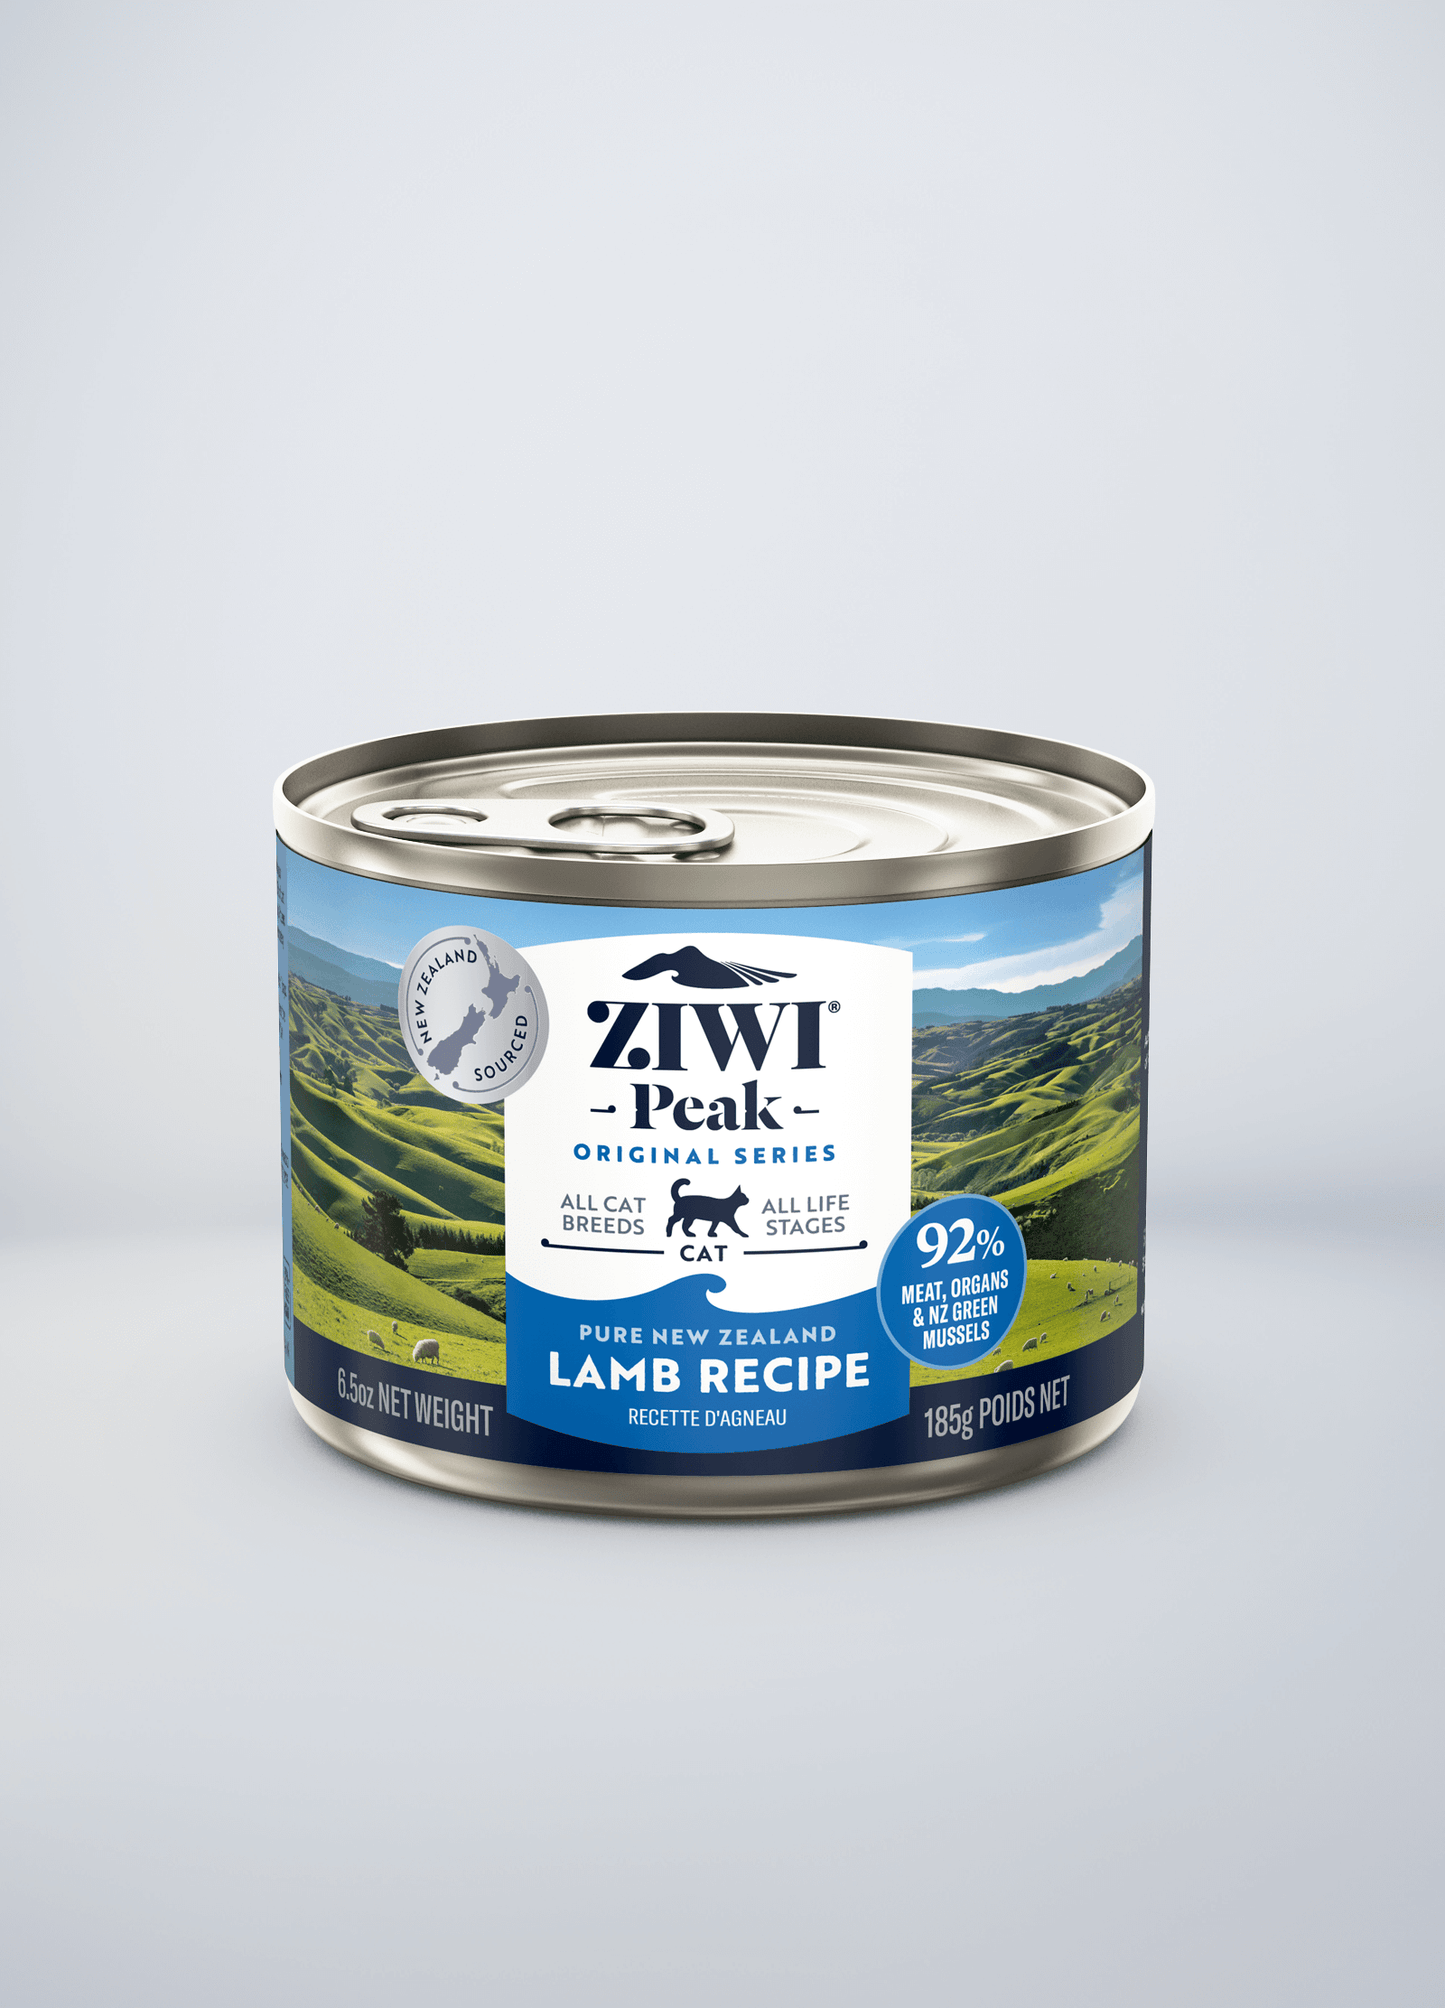 Original Canned Wet Lamb Recipe for cats